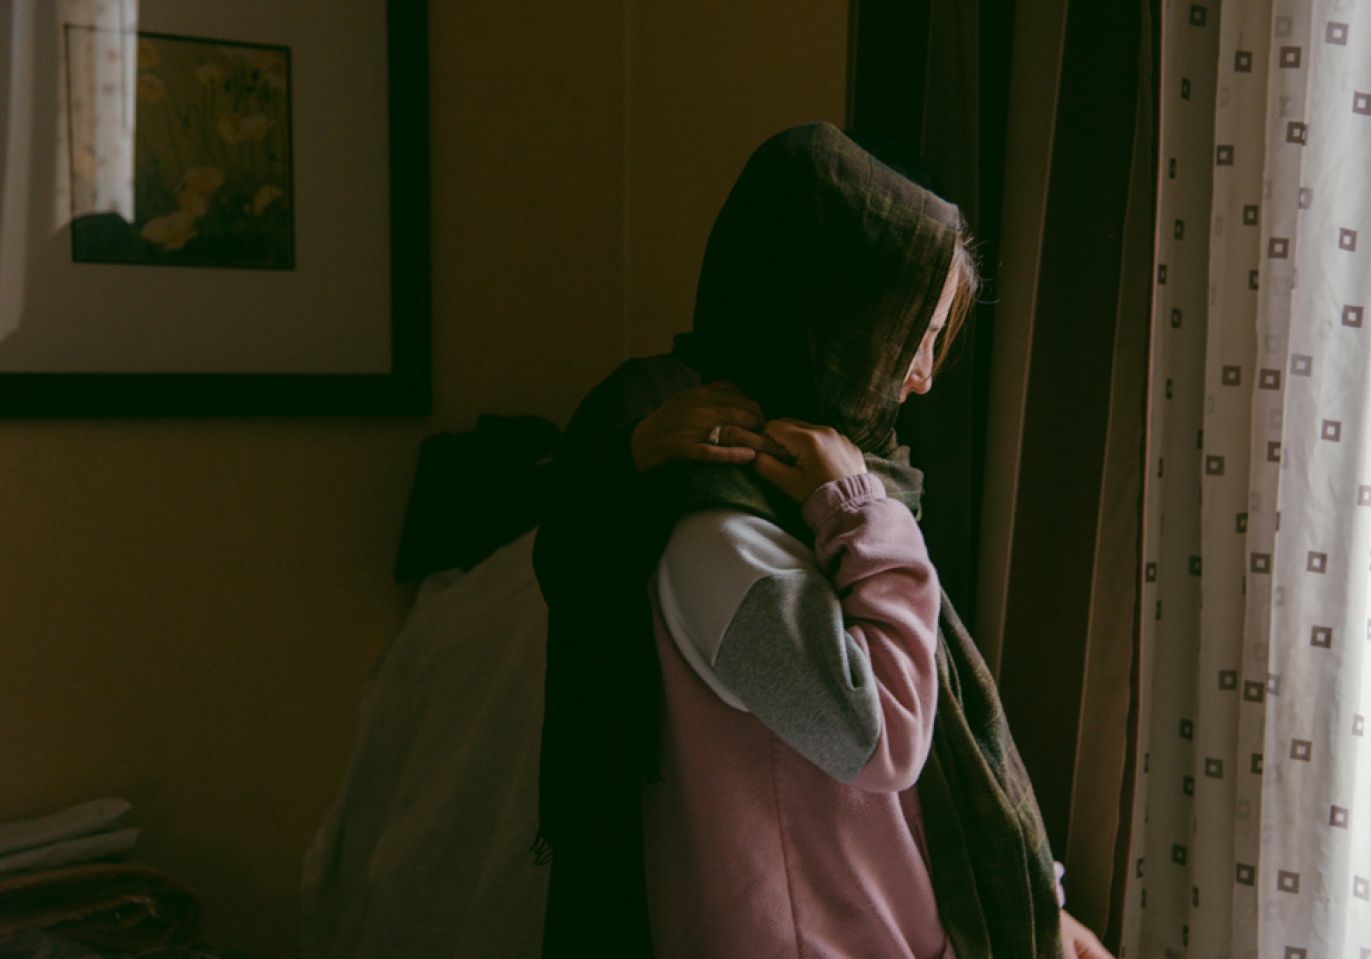 An Afghan woman who asked not to be identified holds hands with her great-niece at a hotel room in Turlock, California. Upon evacuating to the United States, she learned that she has an advanced form of cancer, which she says has put additional strain on her and her family.